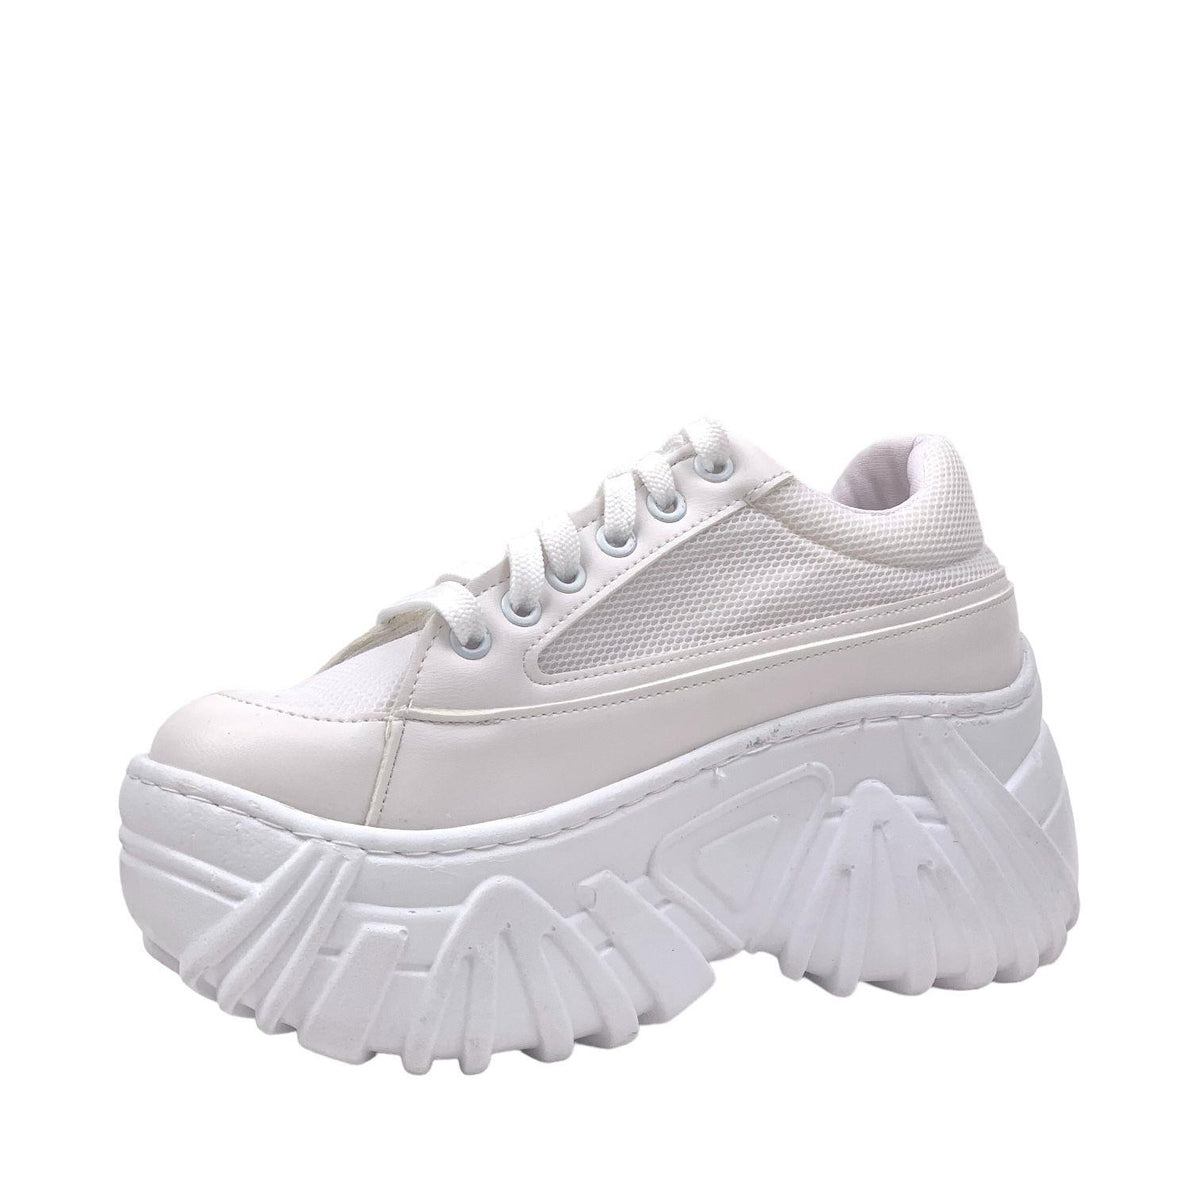 Women's shanny white high sole sneaker sports shoes - STREETMODE™